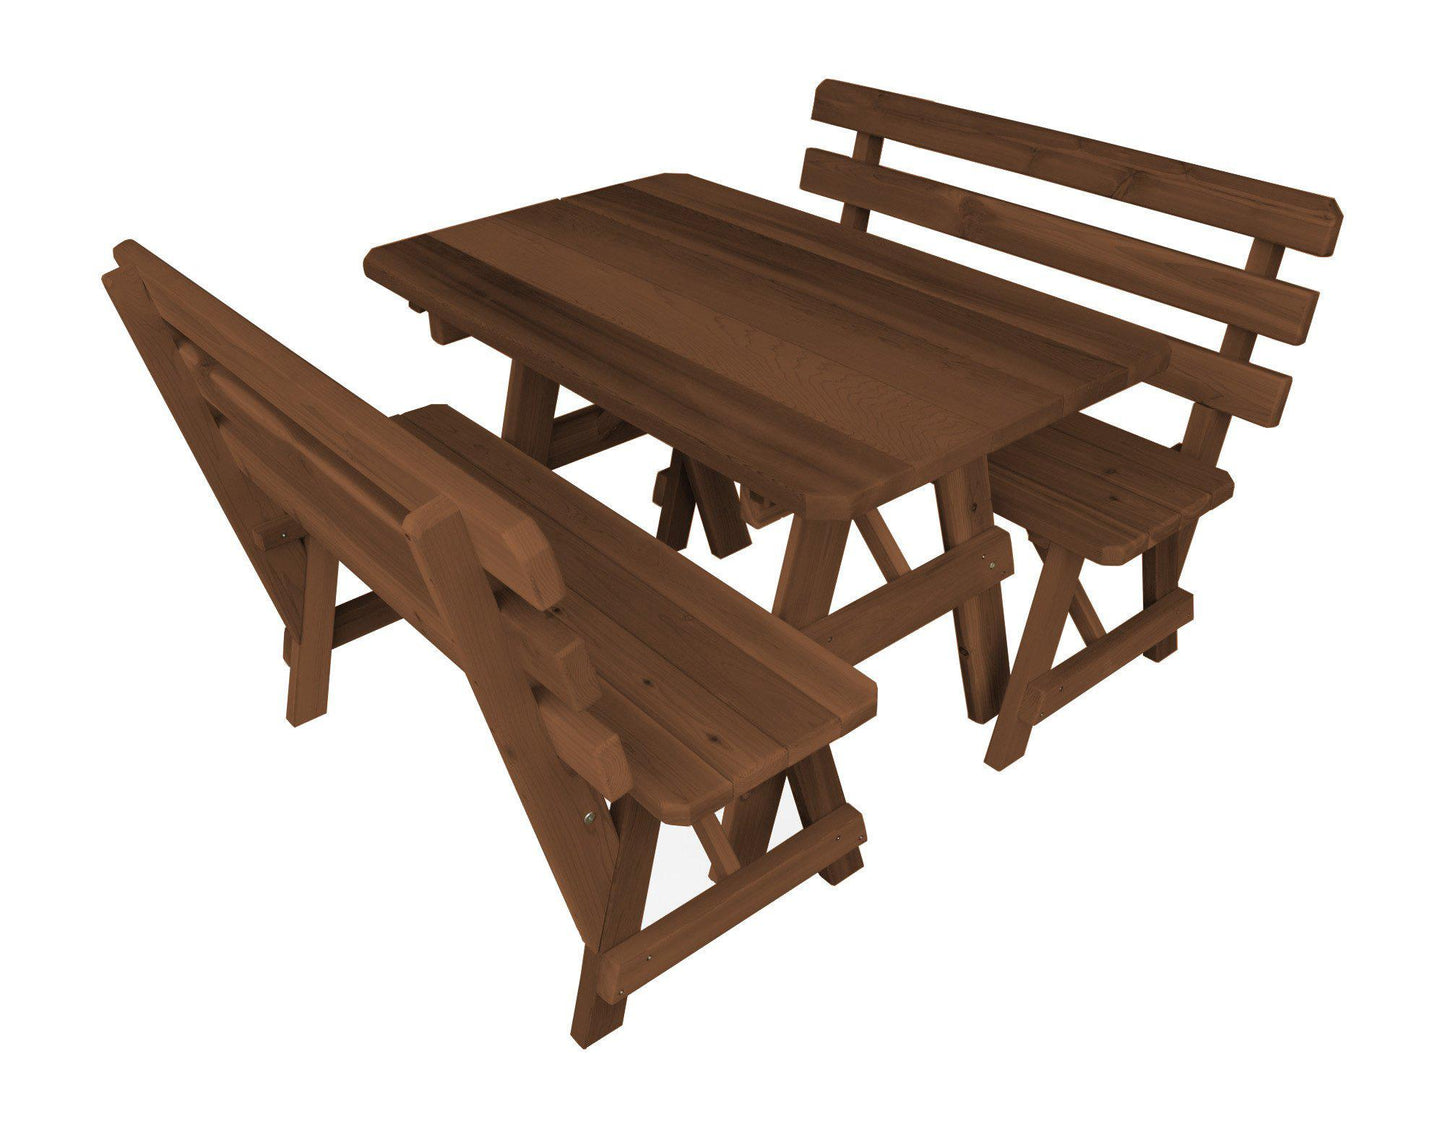 A&L FURNITURE CO. Western Red Cedar 55" Table w/2 Backed Benches - Specify for FREE 2" Umbrella Hole - LEAD TIME TO SHIP 4 WEEKS OR LESS